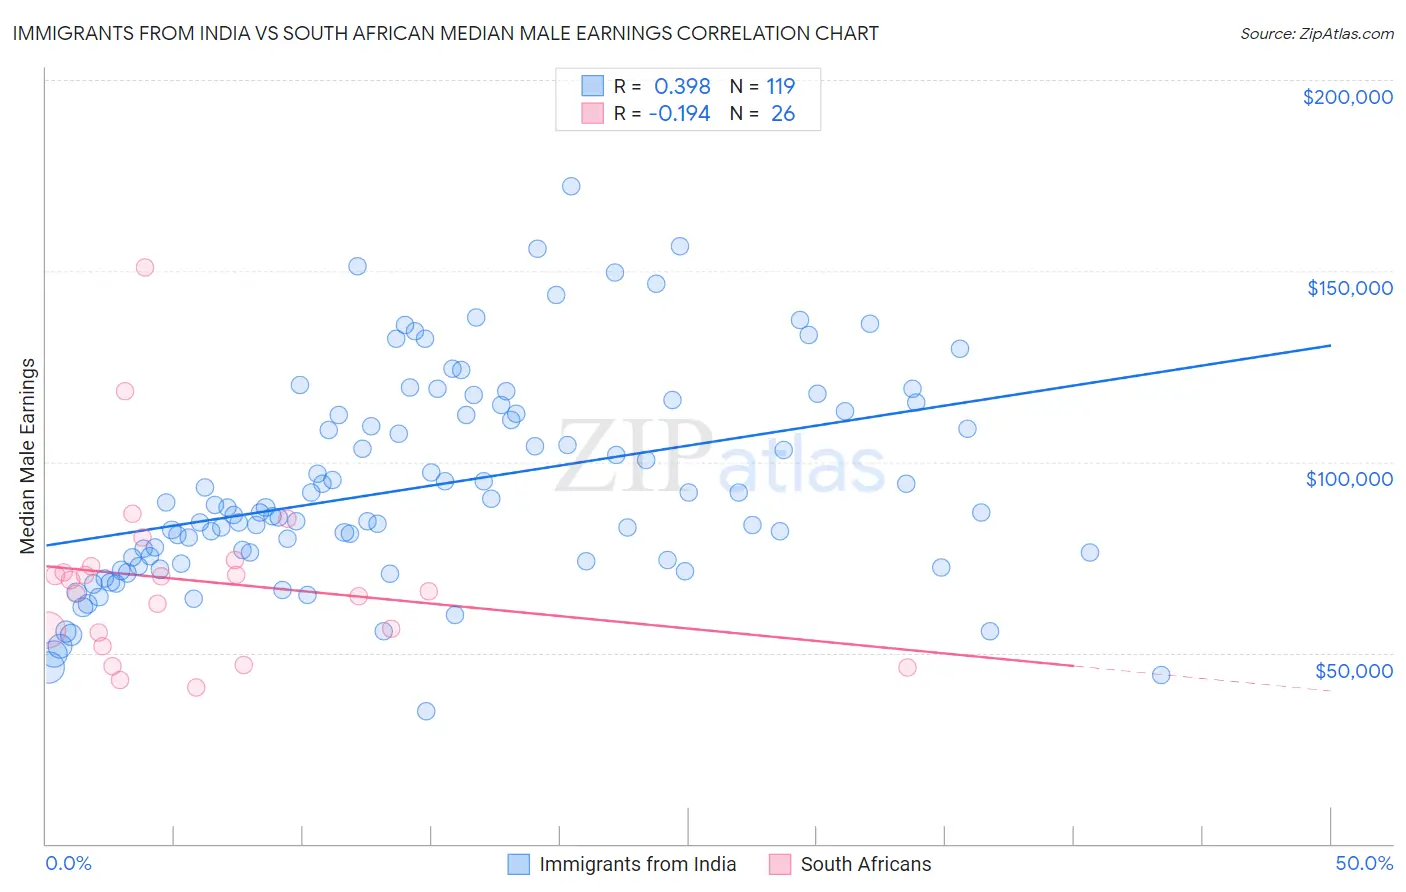 Immigrants from India vs South African Median Male Earnings